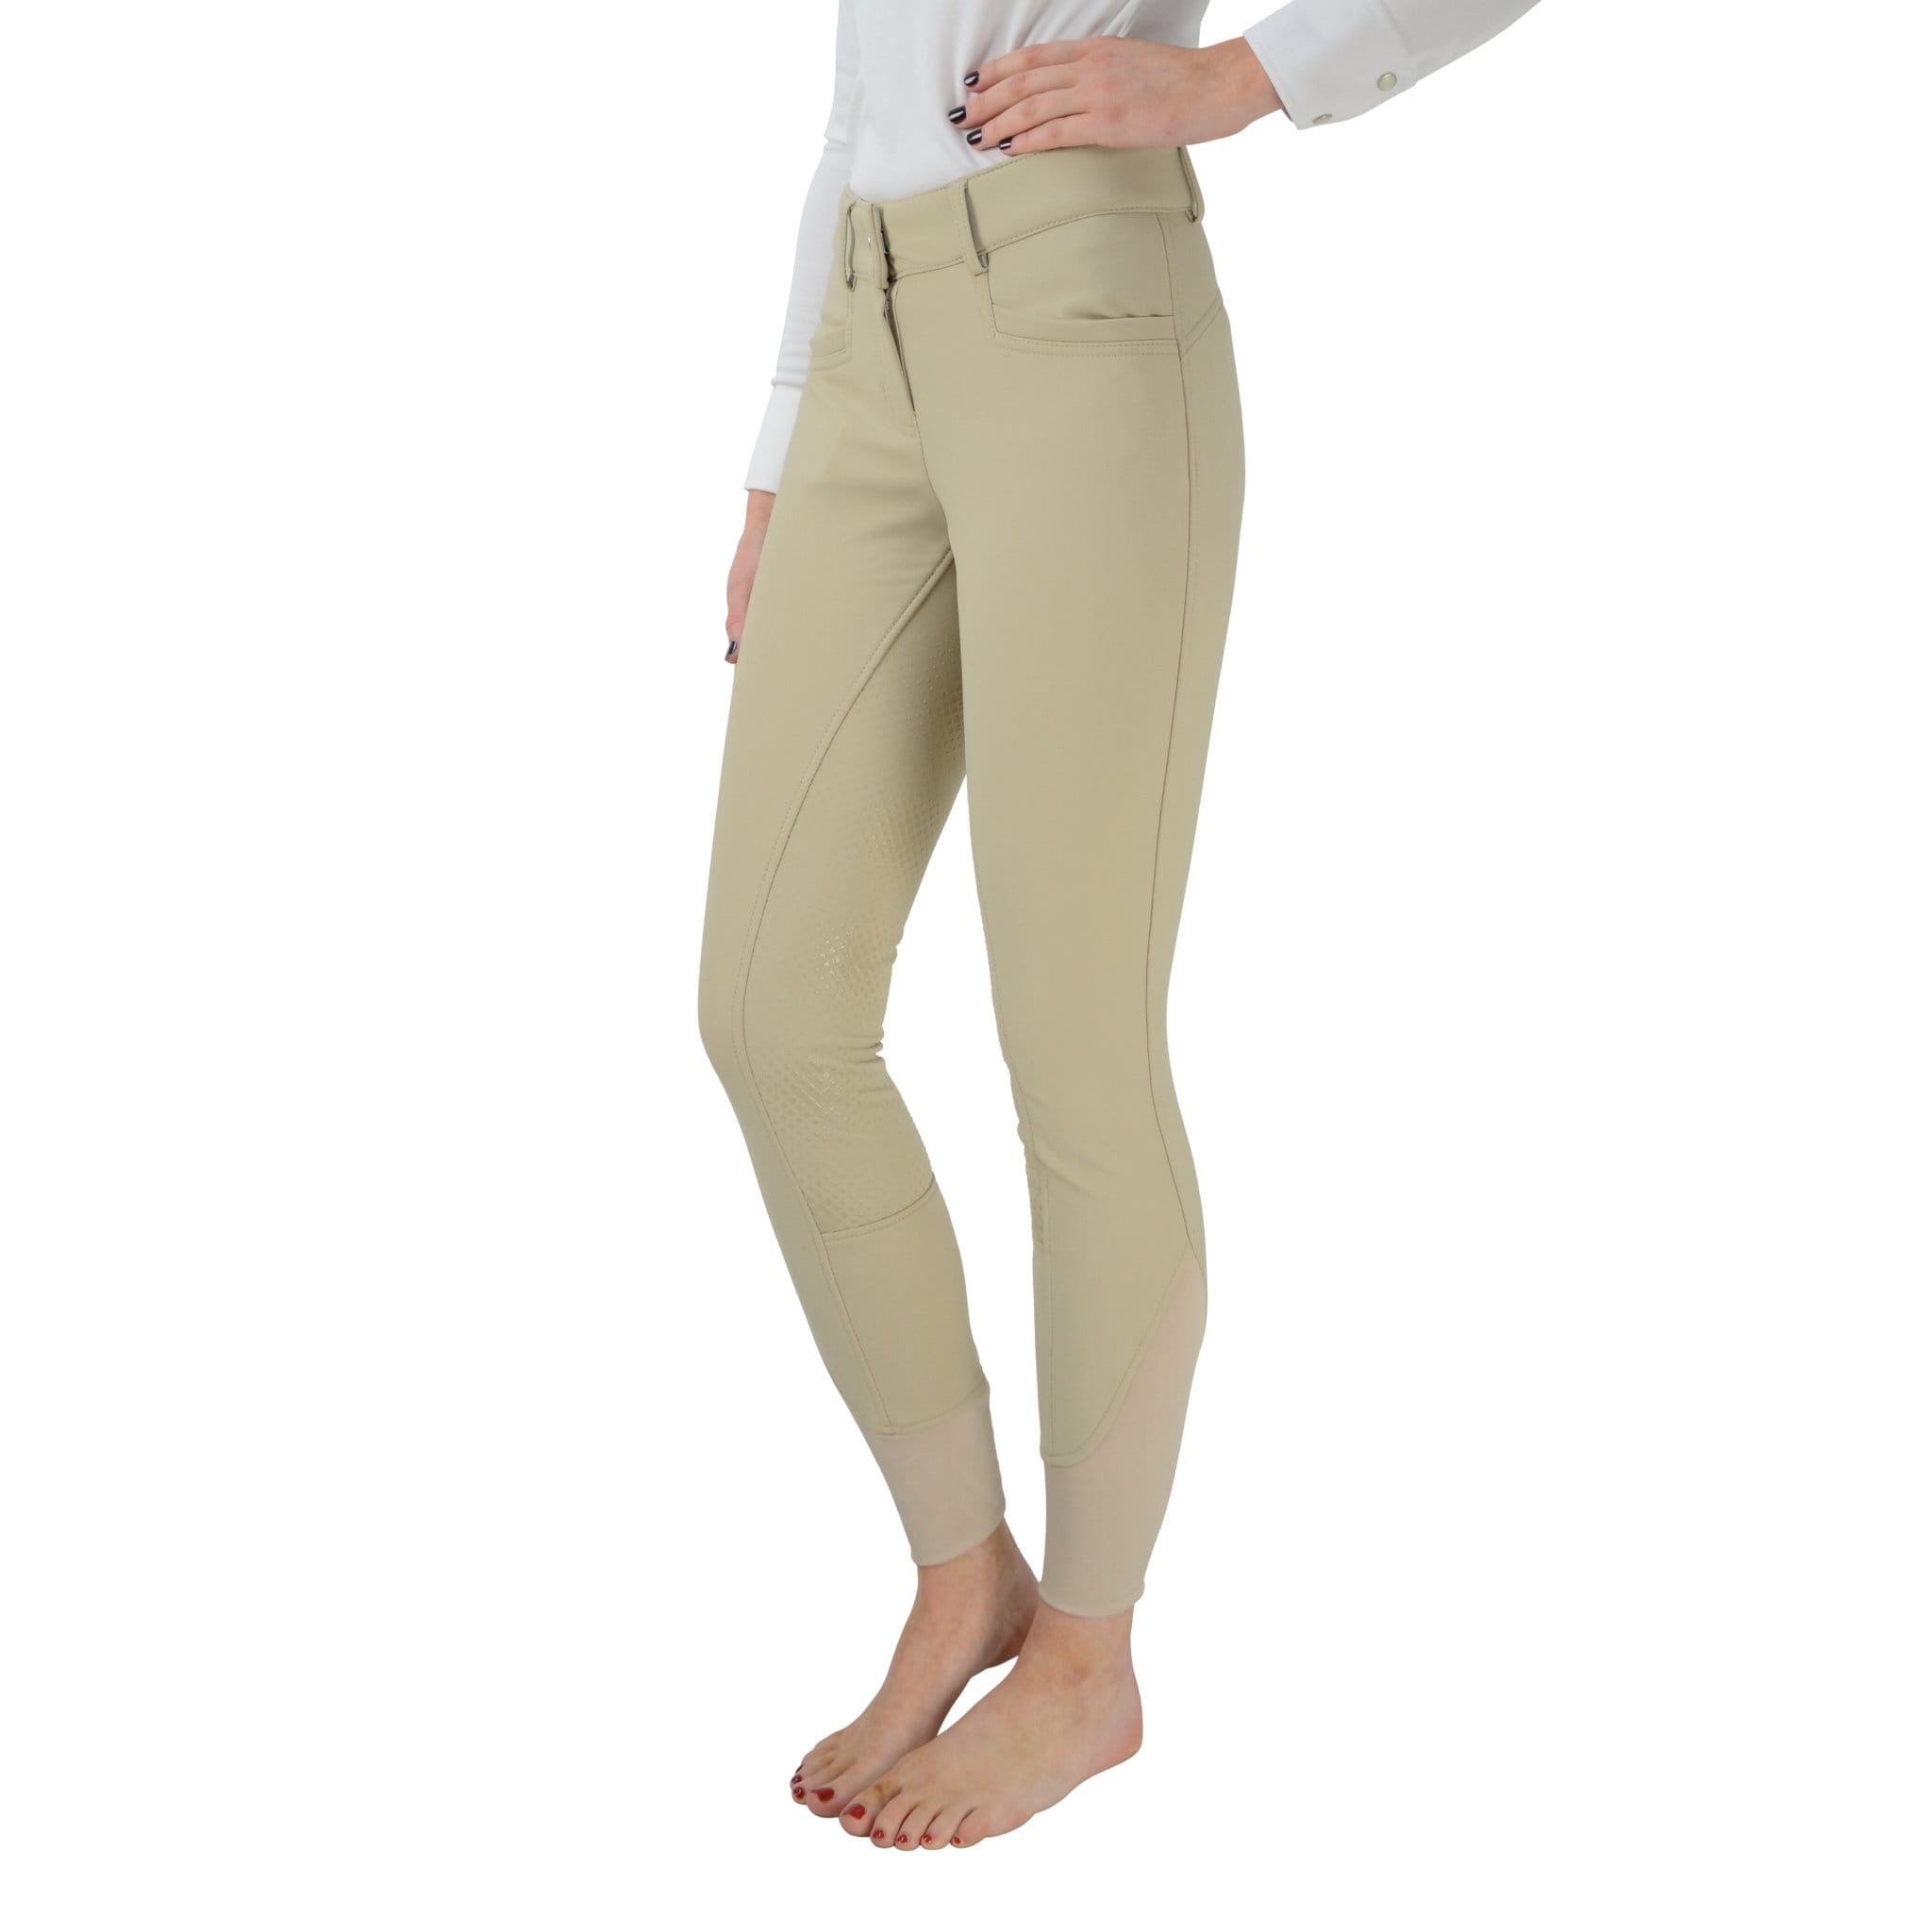 HyPerformance Arctic Softshell Silicone Full Seat Breeches 19560 Beige Front View On Model